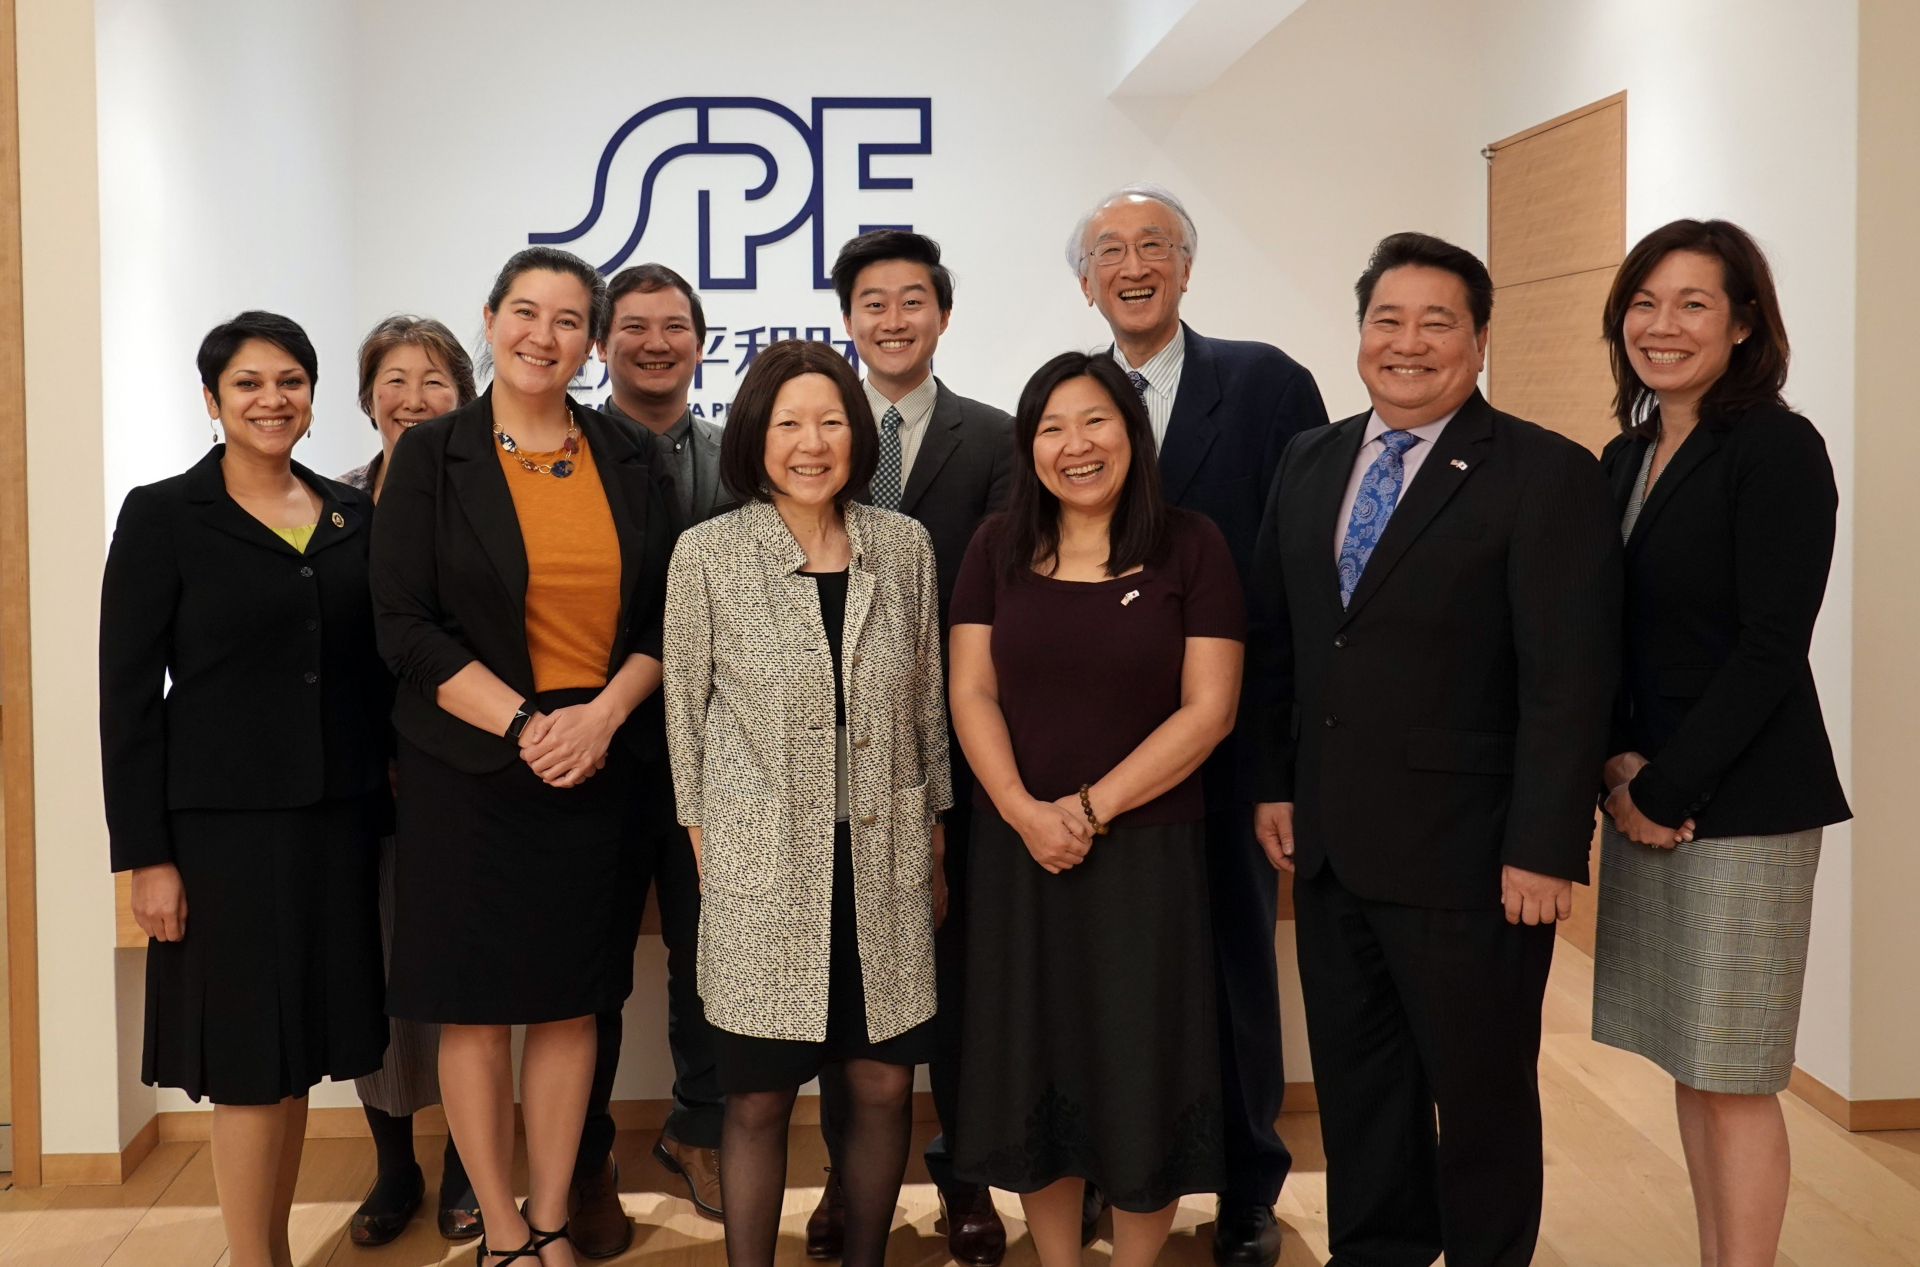 From Tokyo to Tottori, 2019 Asian American Leadership Delegation builds ties between U.S. state-level representatives and community leaders across Japan